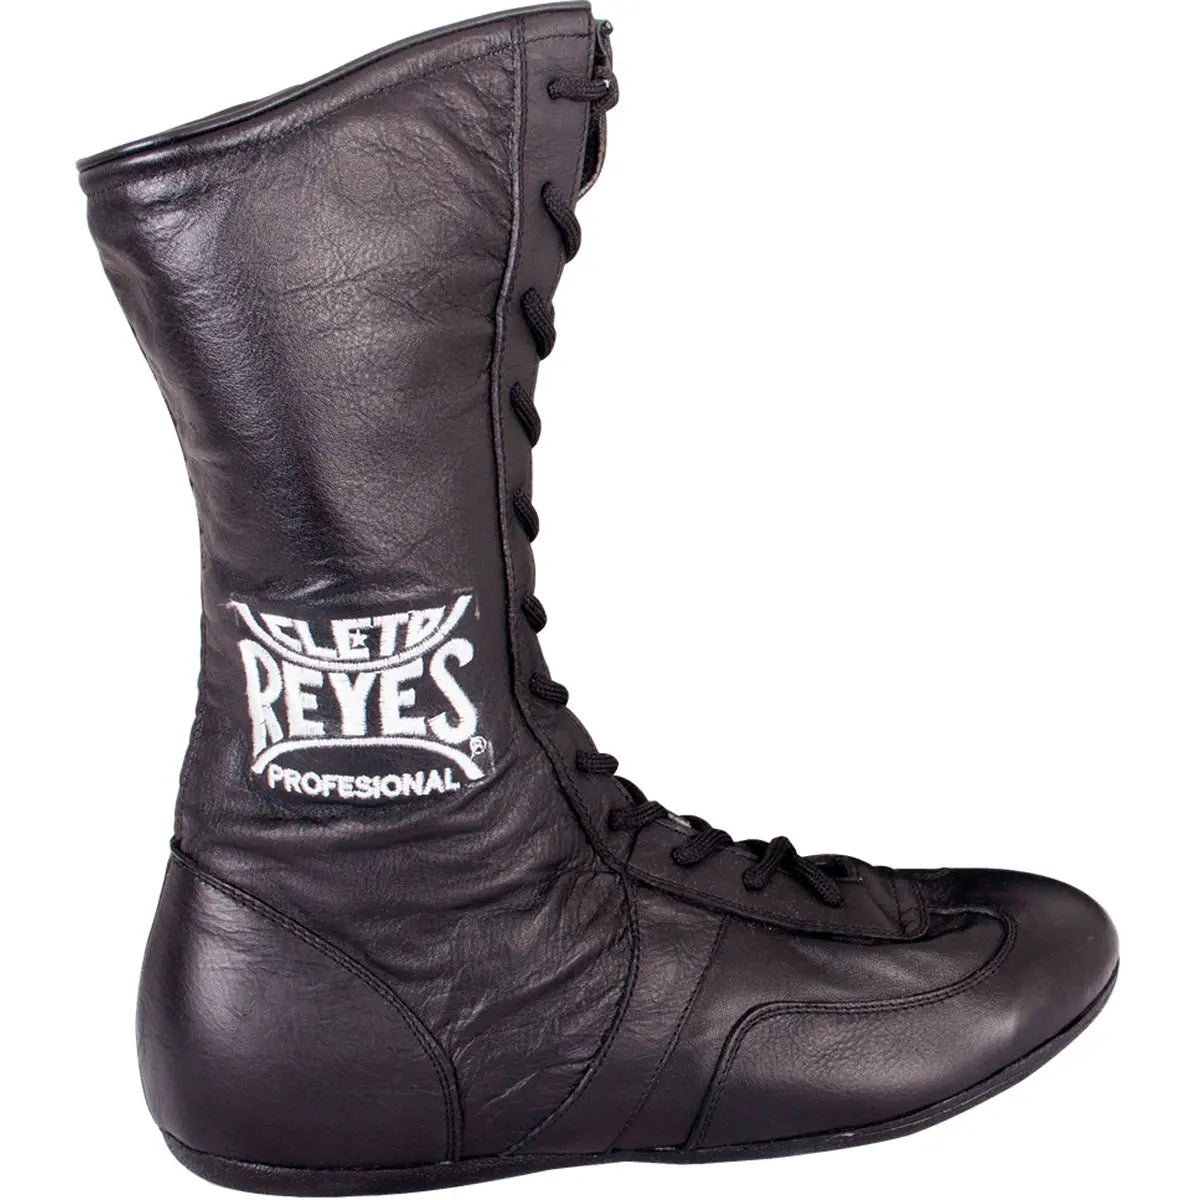 Cleto Reyes Leather Lace Up High Top Boxing Shoes - Black Cleto Reyes